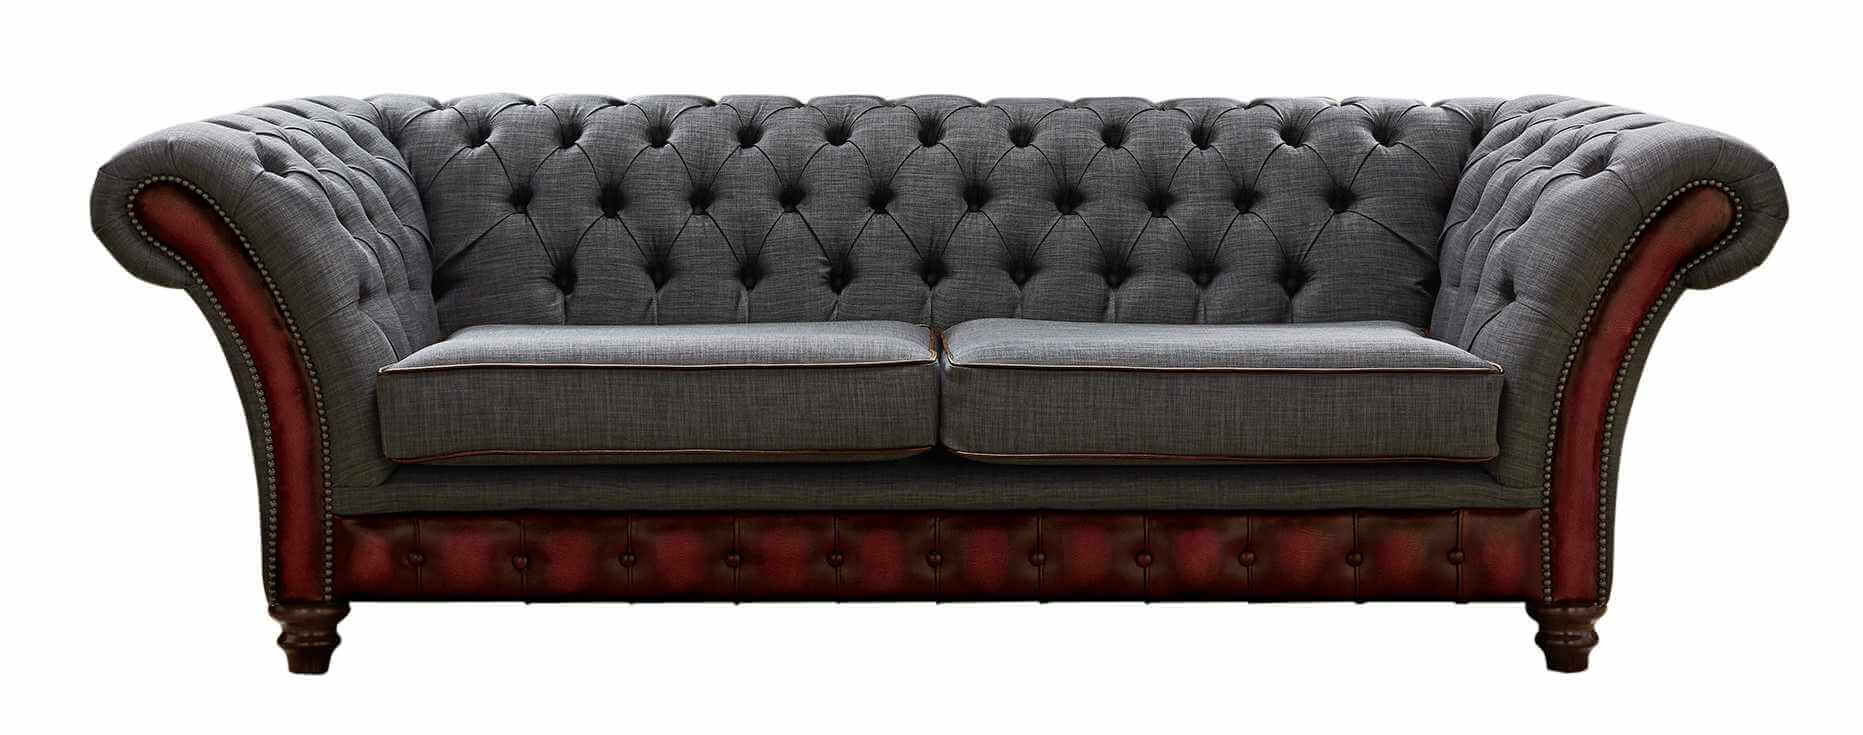 Chesterfield Jepson Marinello Pewter Grey Fabric Leather Sofa Antique Oxblood